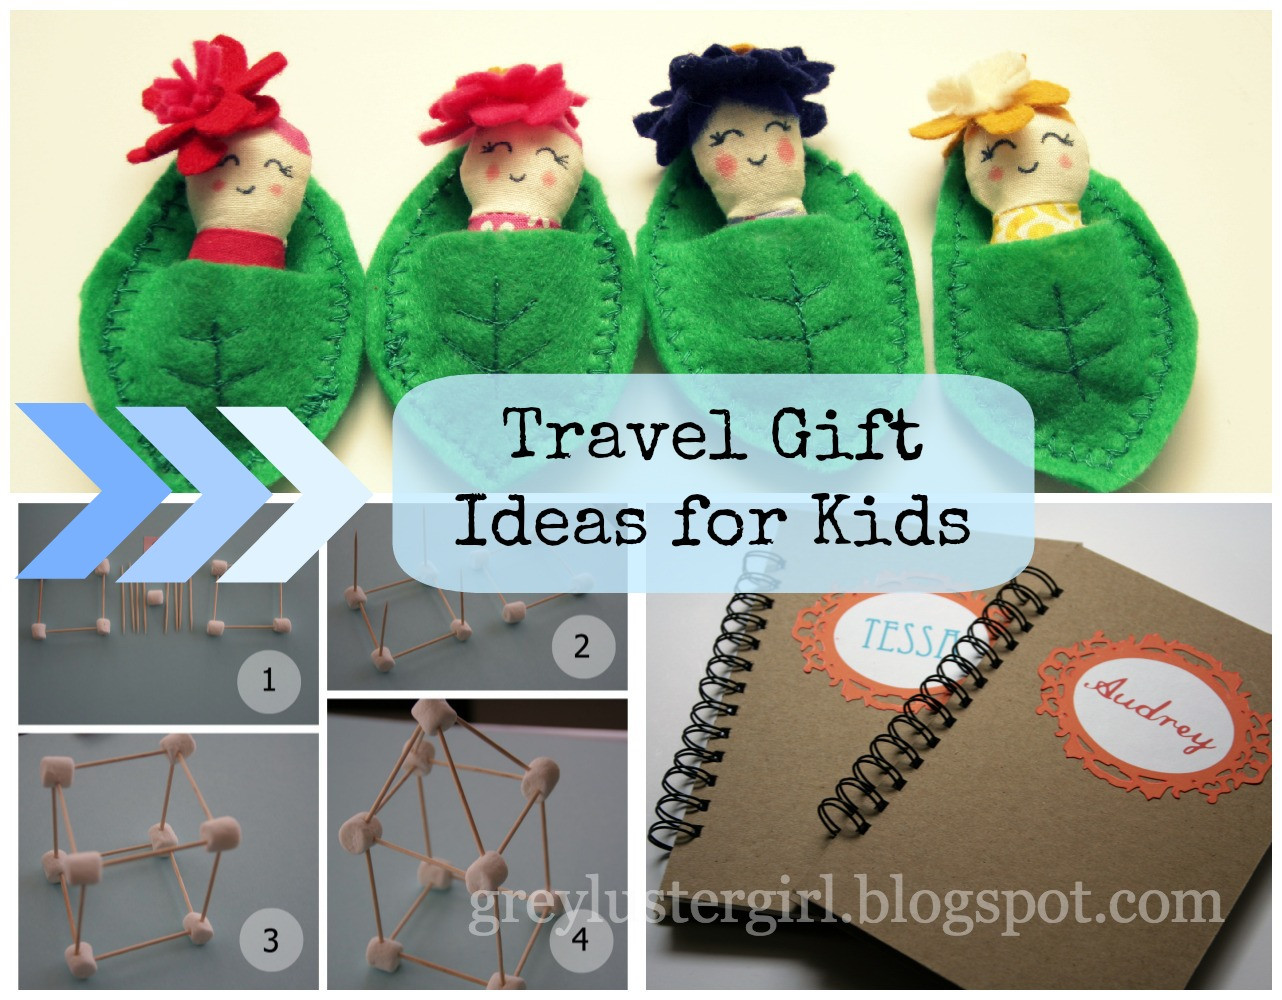 DIY Travel Gifts
 Homemade Travel Gift Ideas for Kids